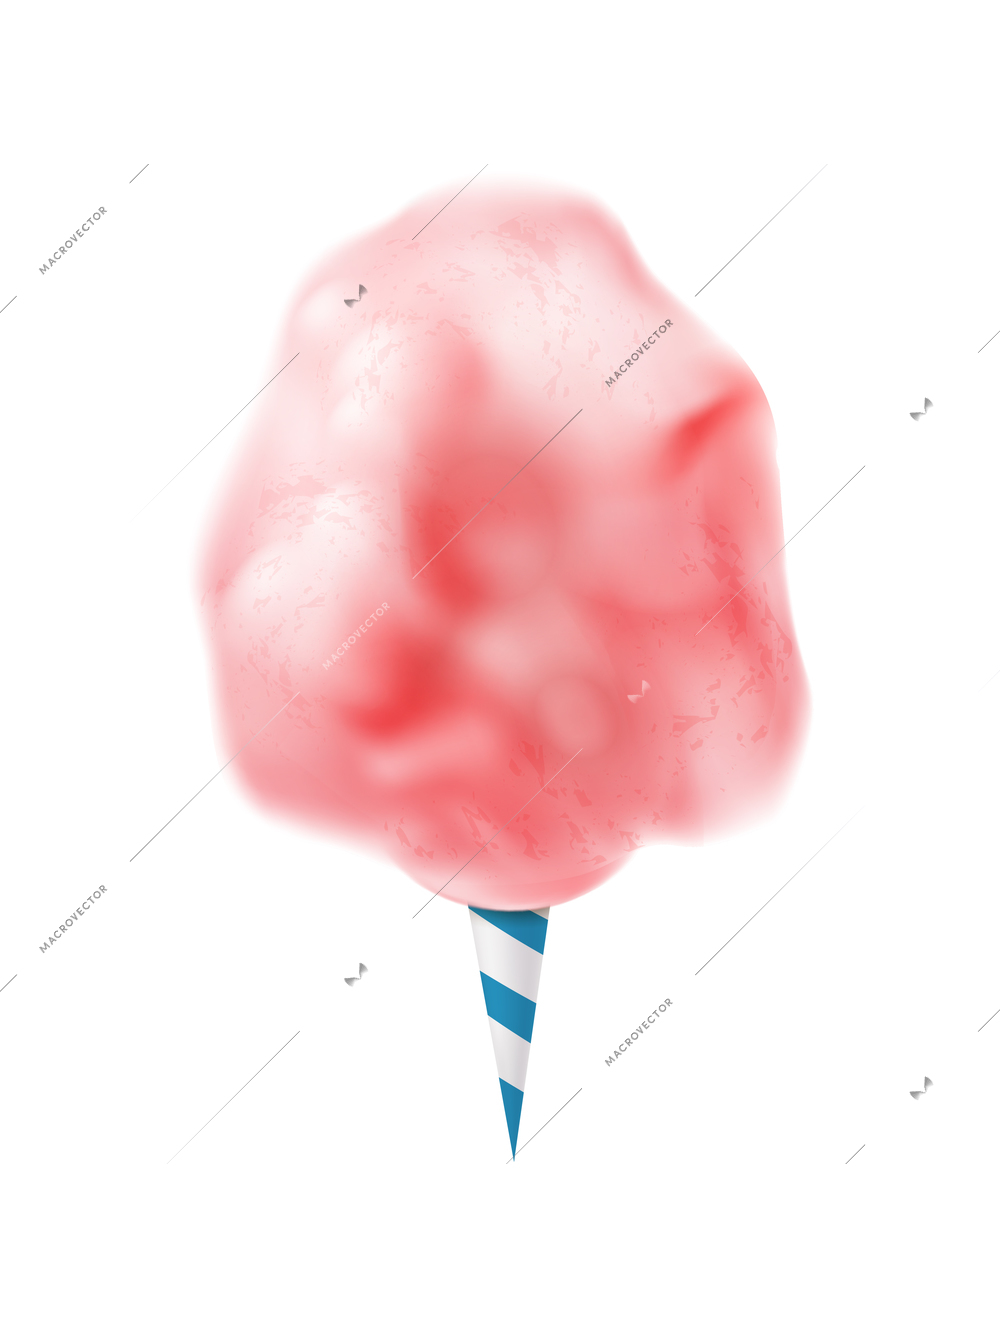 Realistic candy sugar cotton composition with isolated image of colorful confectionery candyfloss stick vector illustration